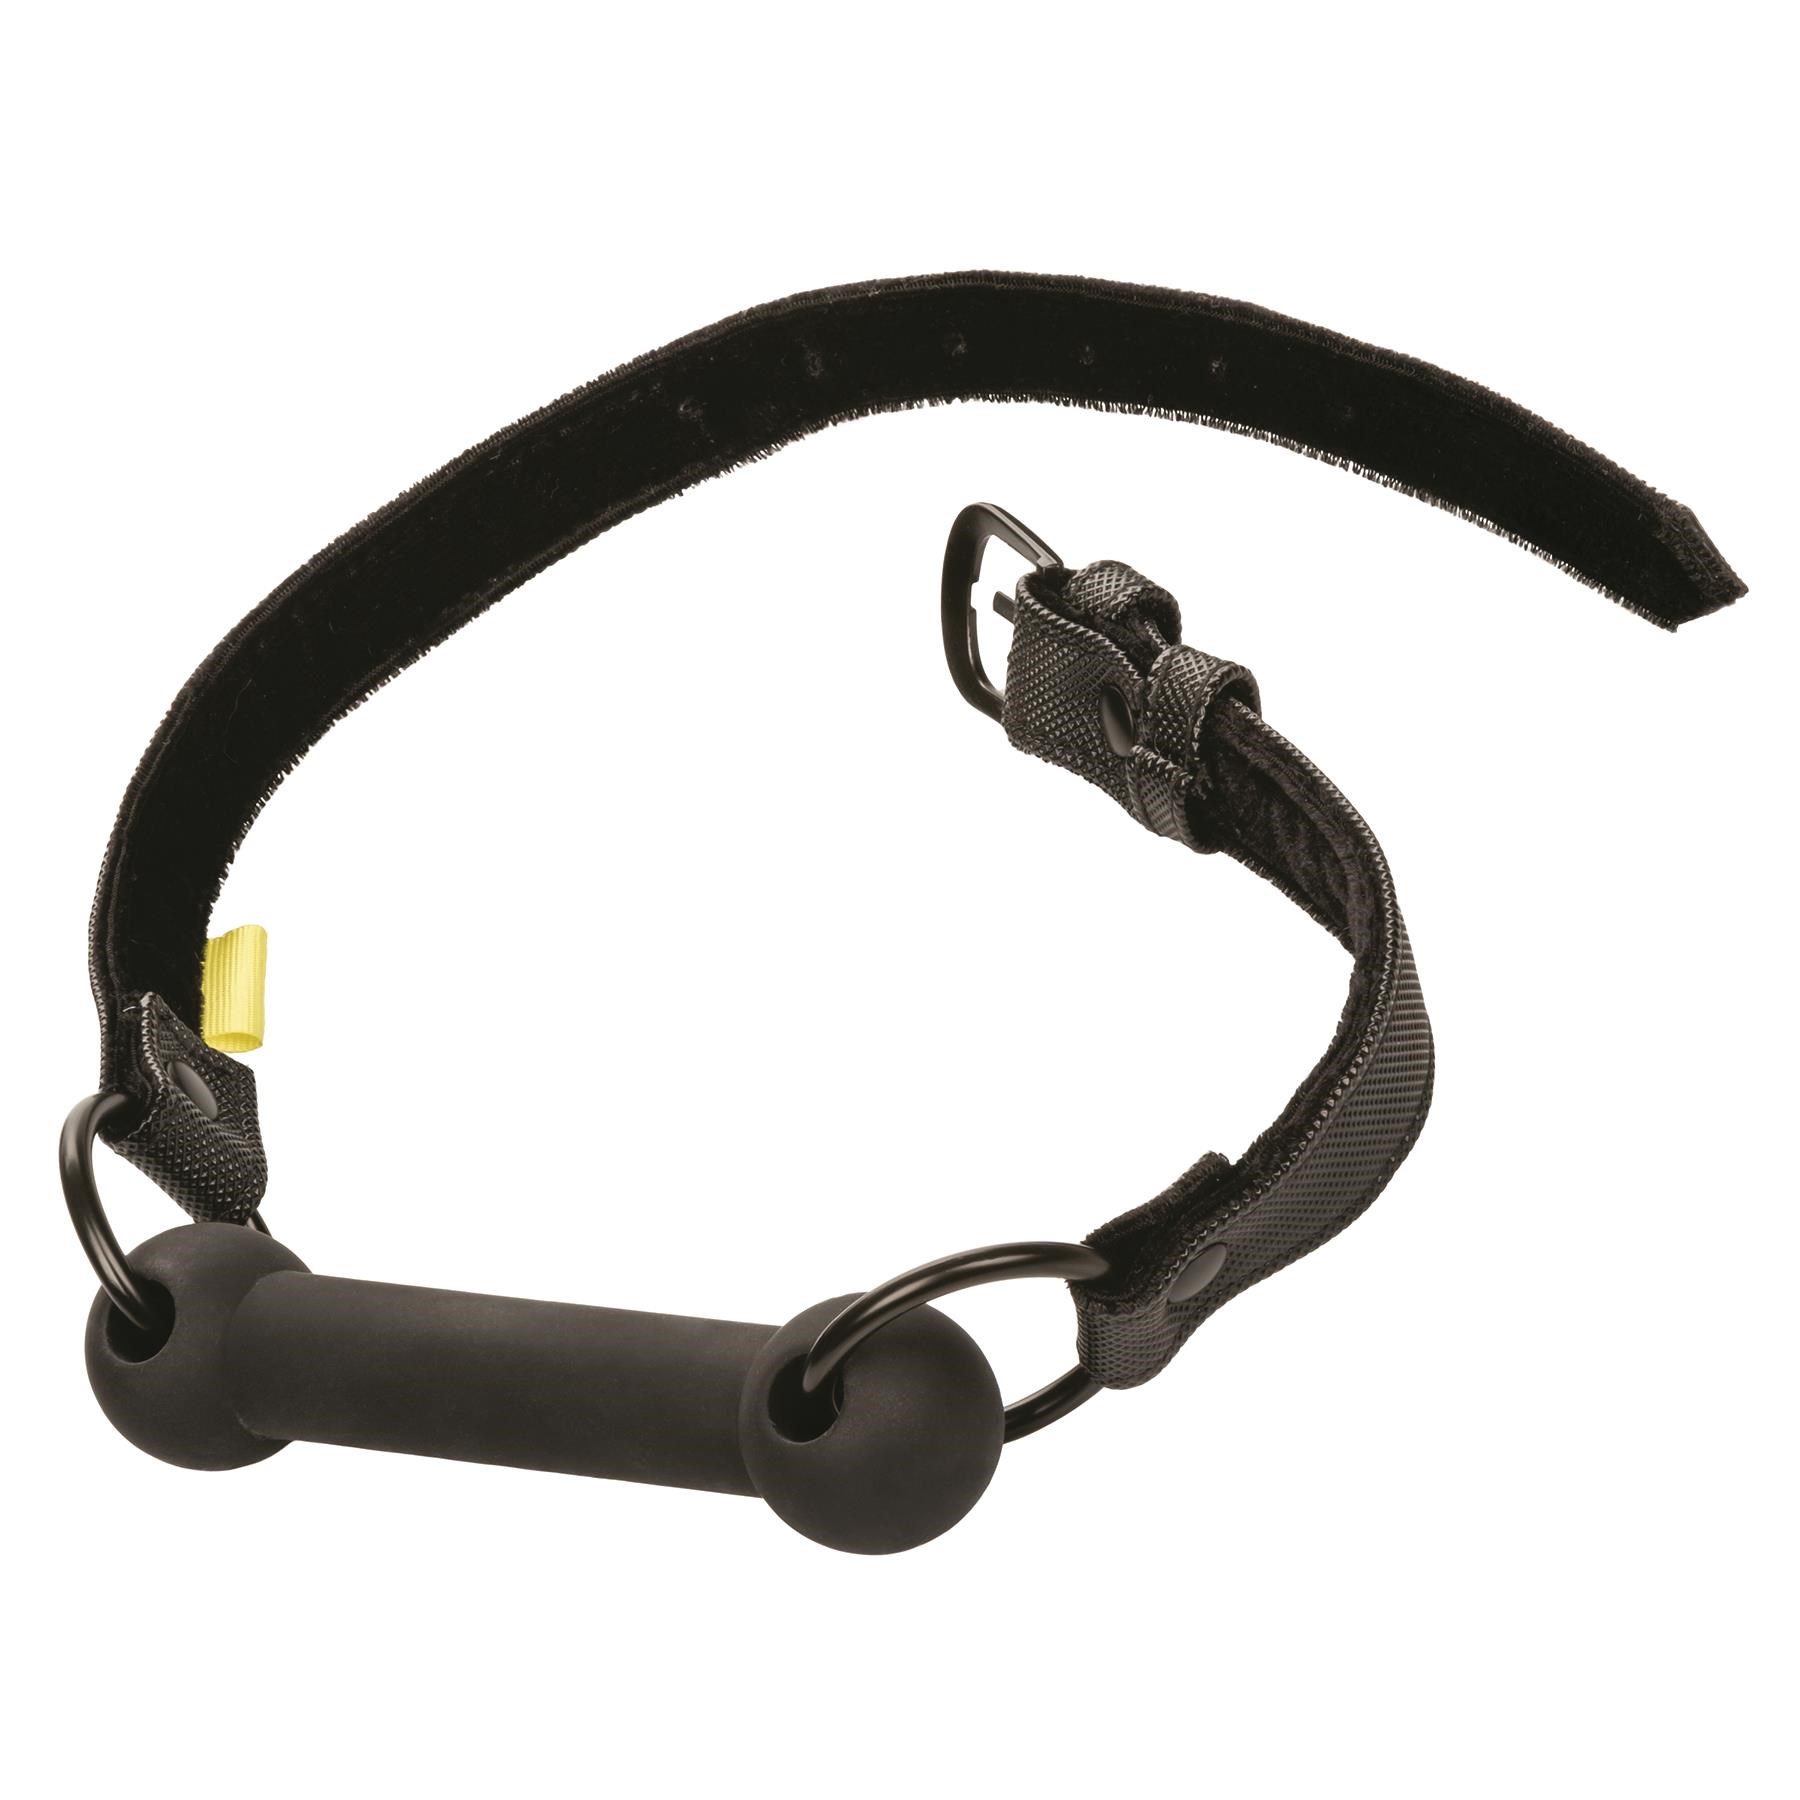 Boundless Bar Gag Product Shot With Buckle Open